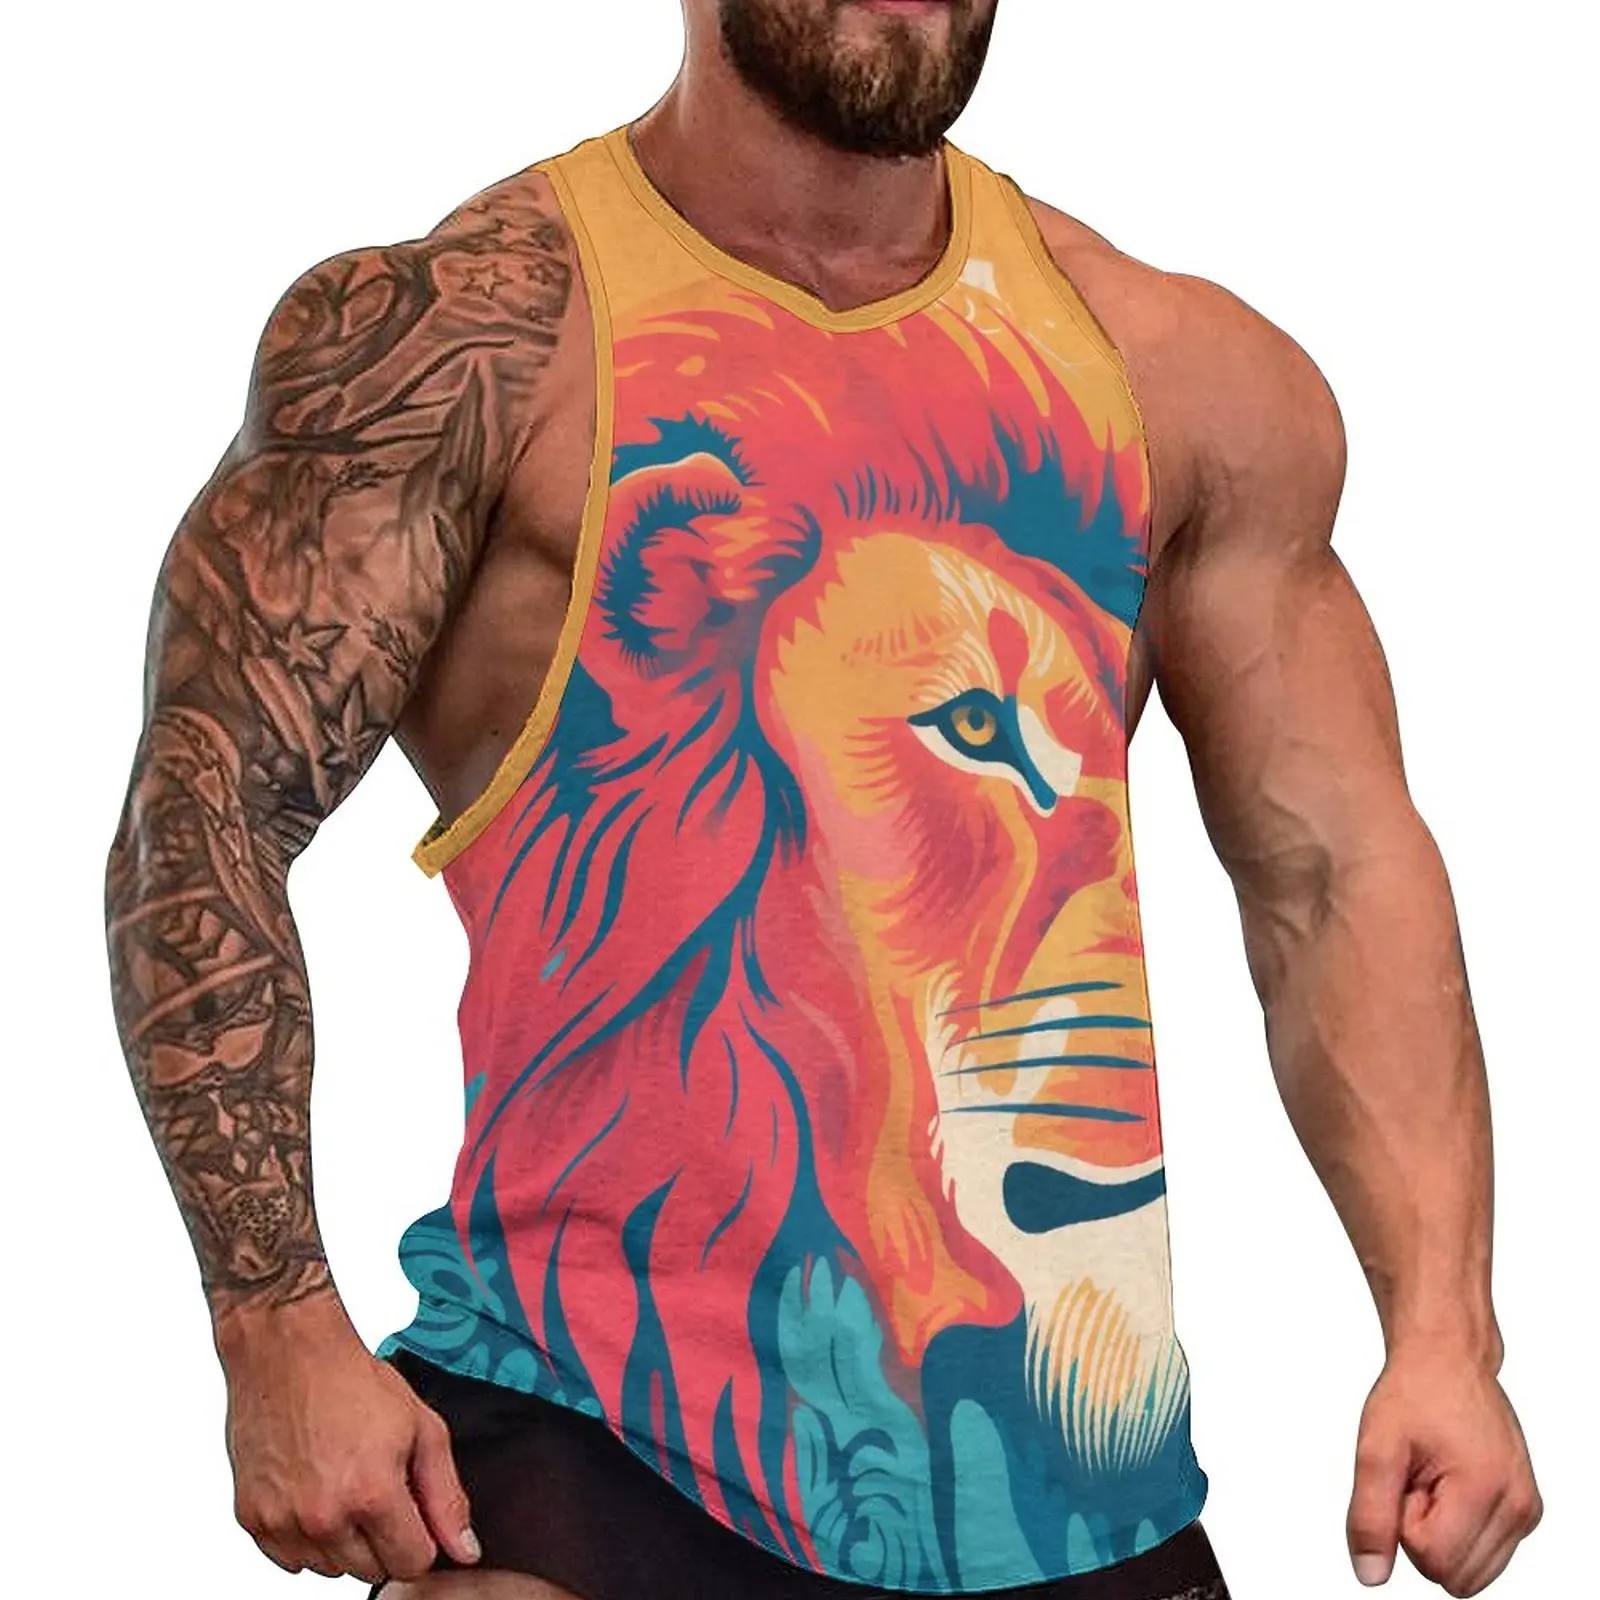 

Lion Tank Top Men Neo Fauvism Gym Oversize Tops Summer Muscle Graphic Sleeveless Vests